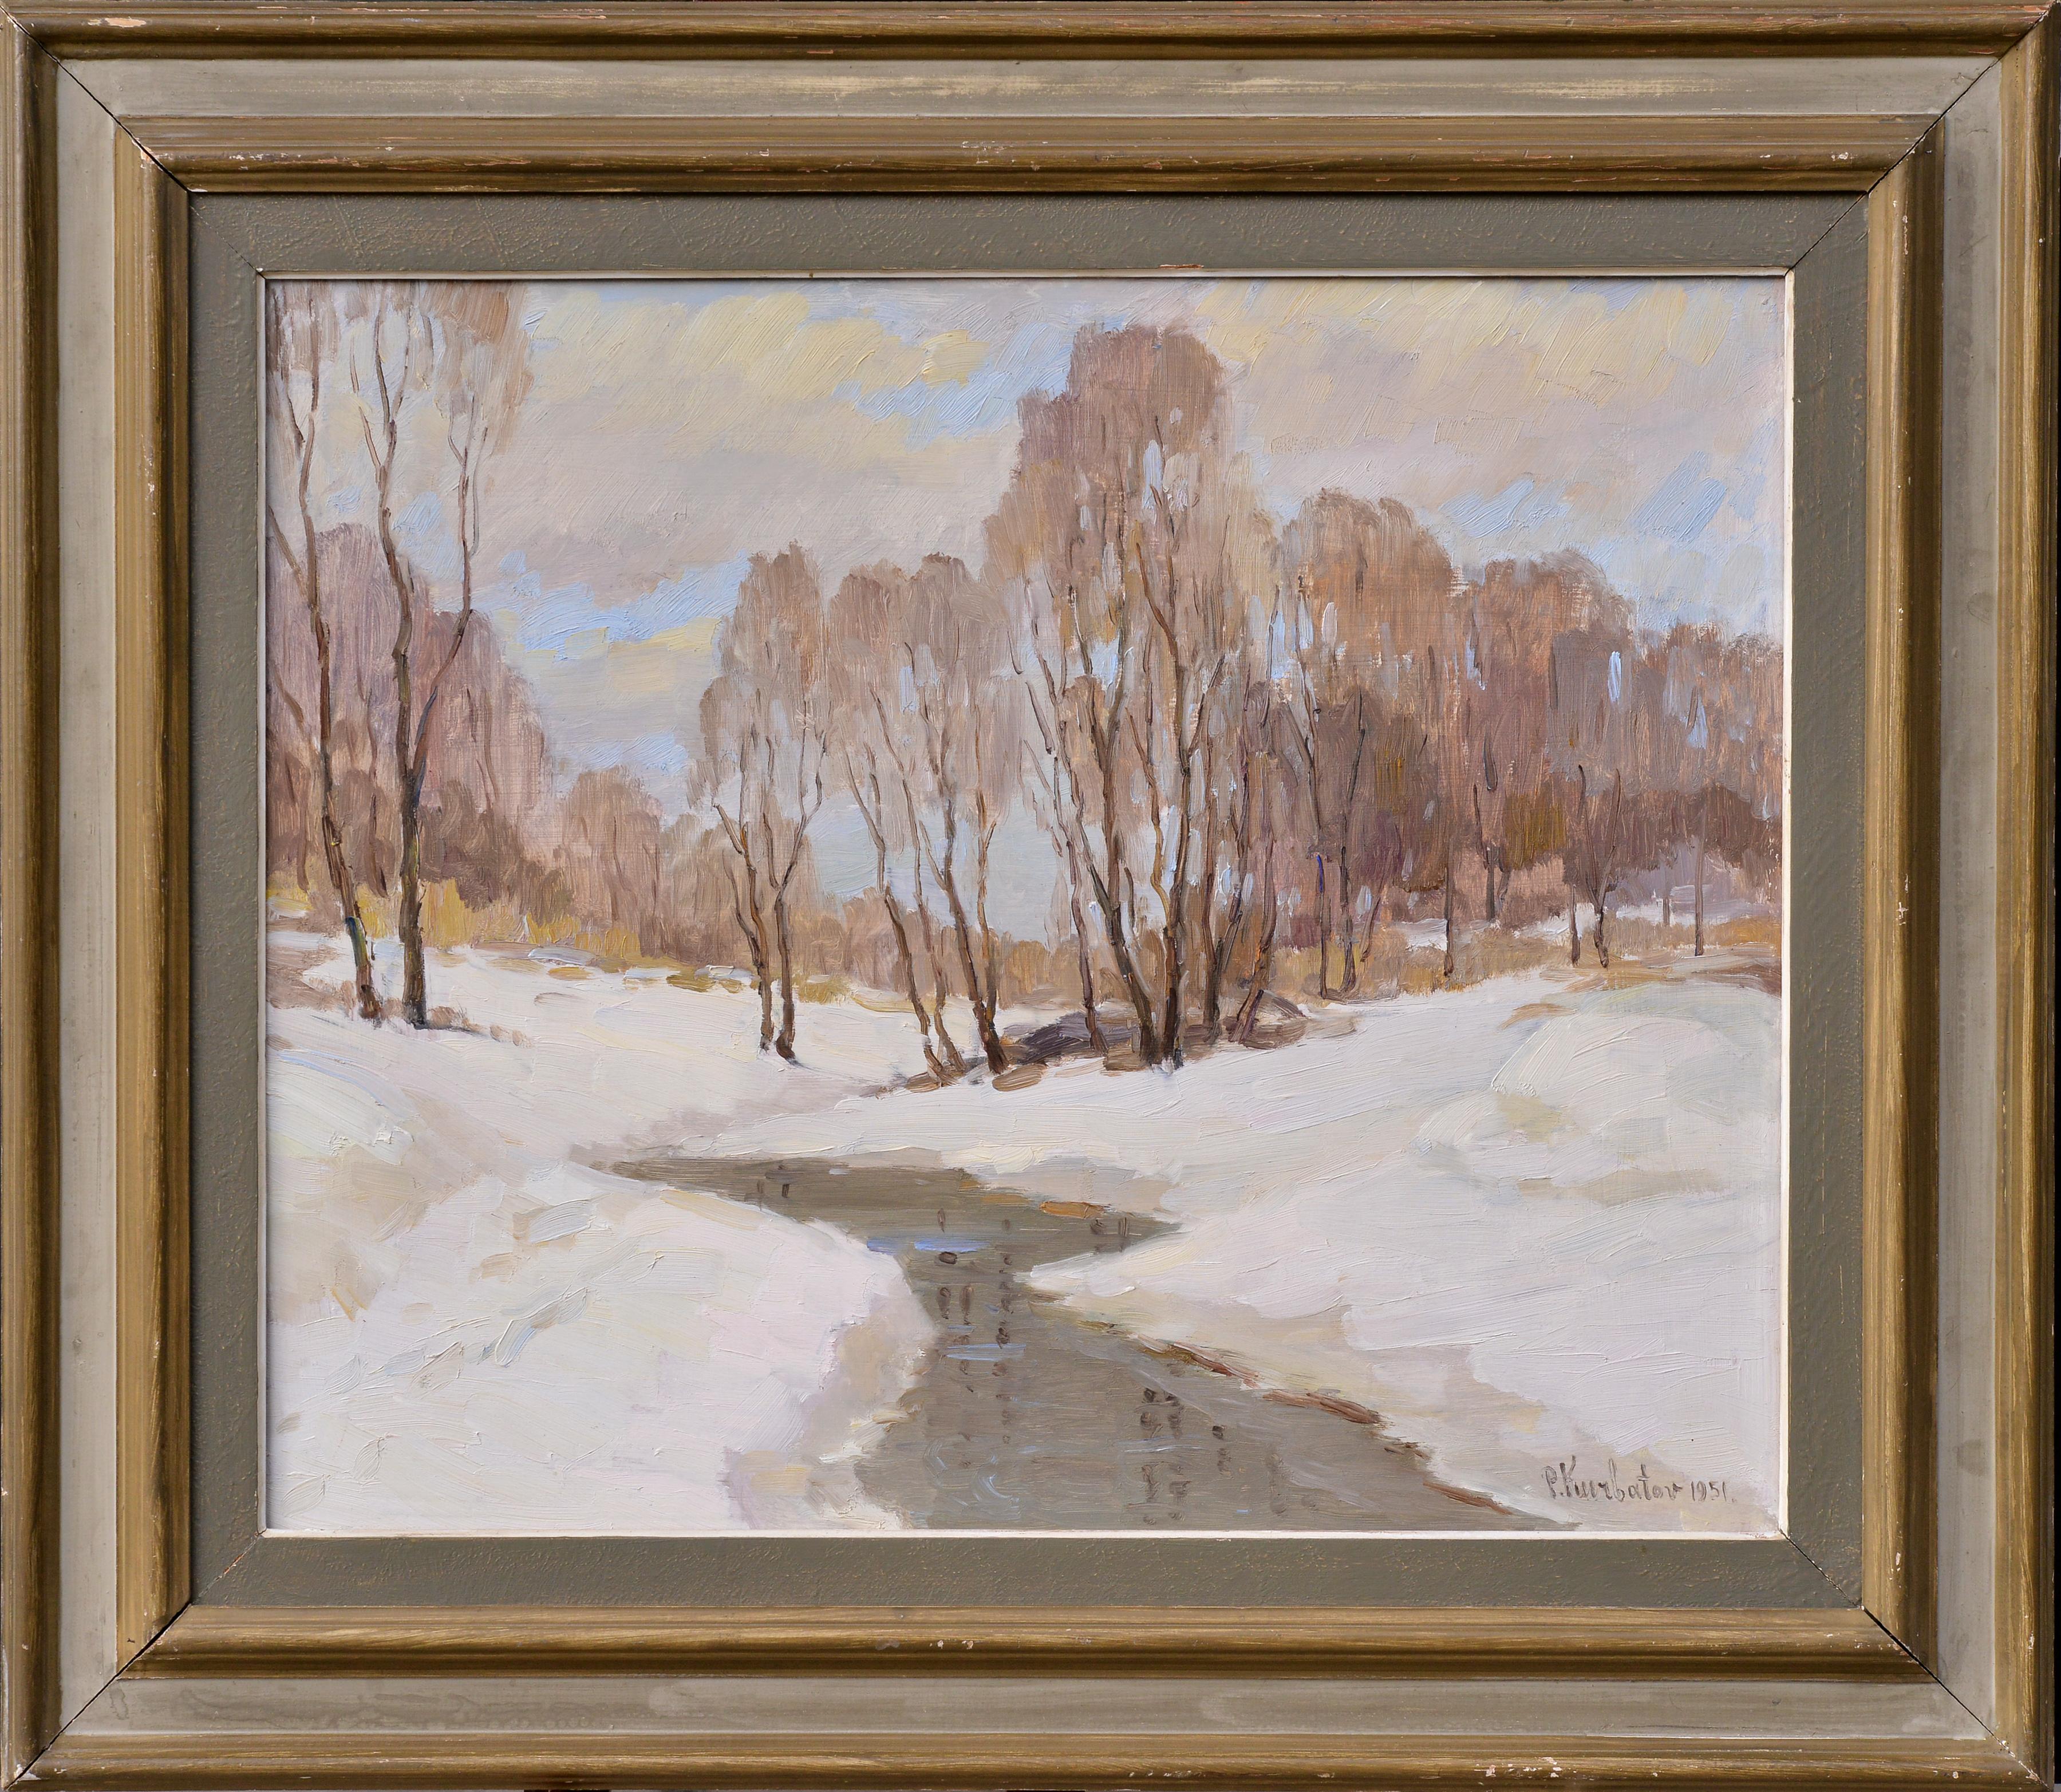 American Winter Landscape 1951 Vintage Oil Painting by Impressionist Master